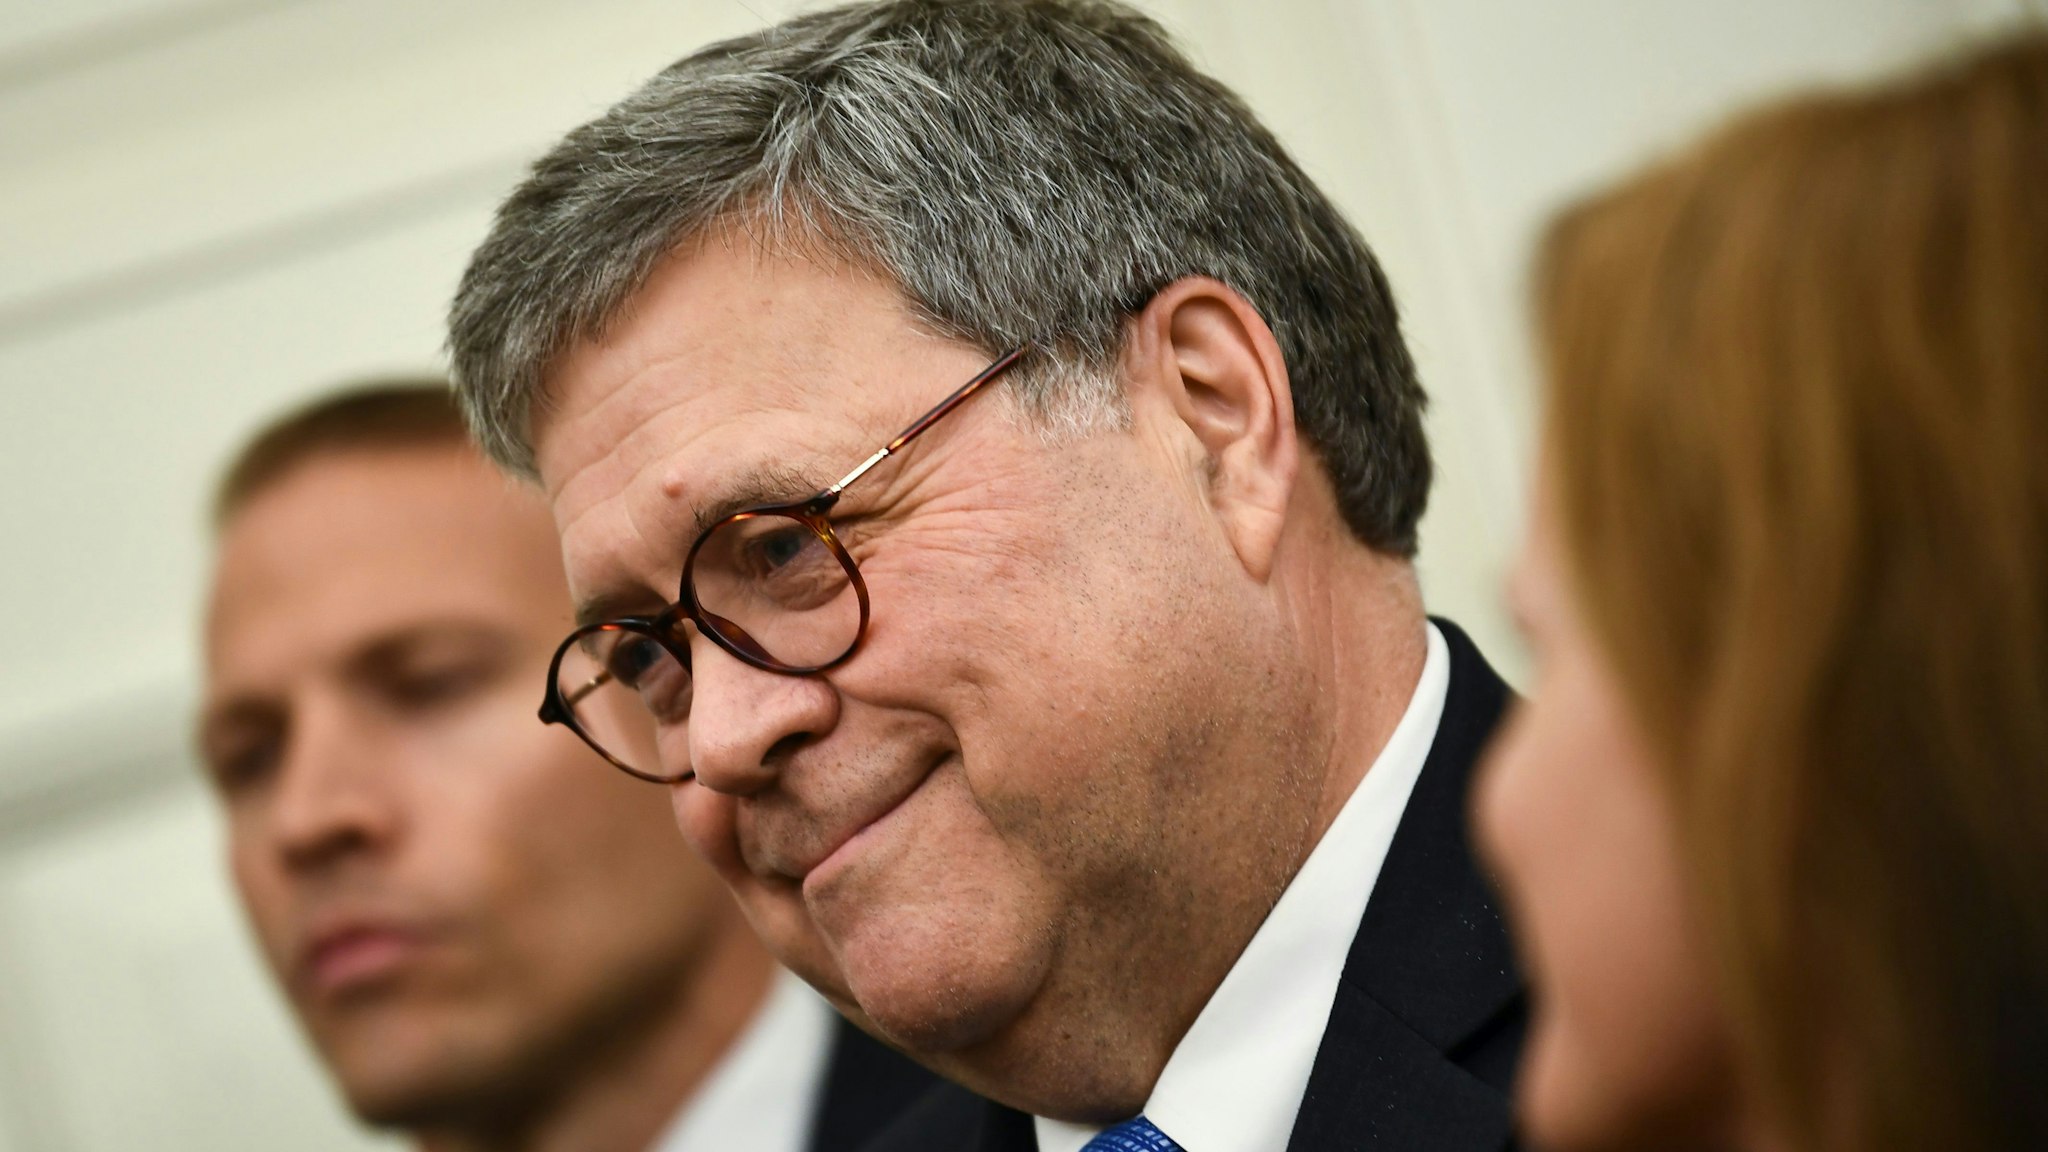 US Attorney General William Barr (C) looks on during a Medal of Freedom ceremony in the Oval Office at the White House in Washington, DC on October 8, 2019.